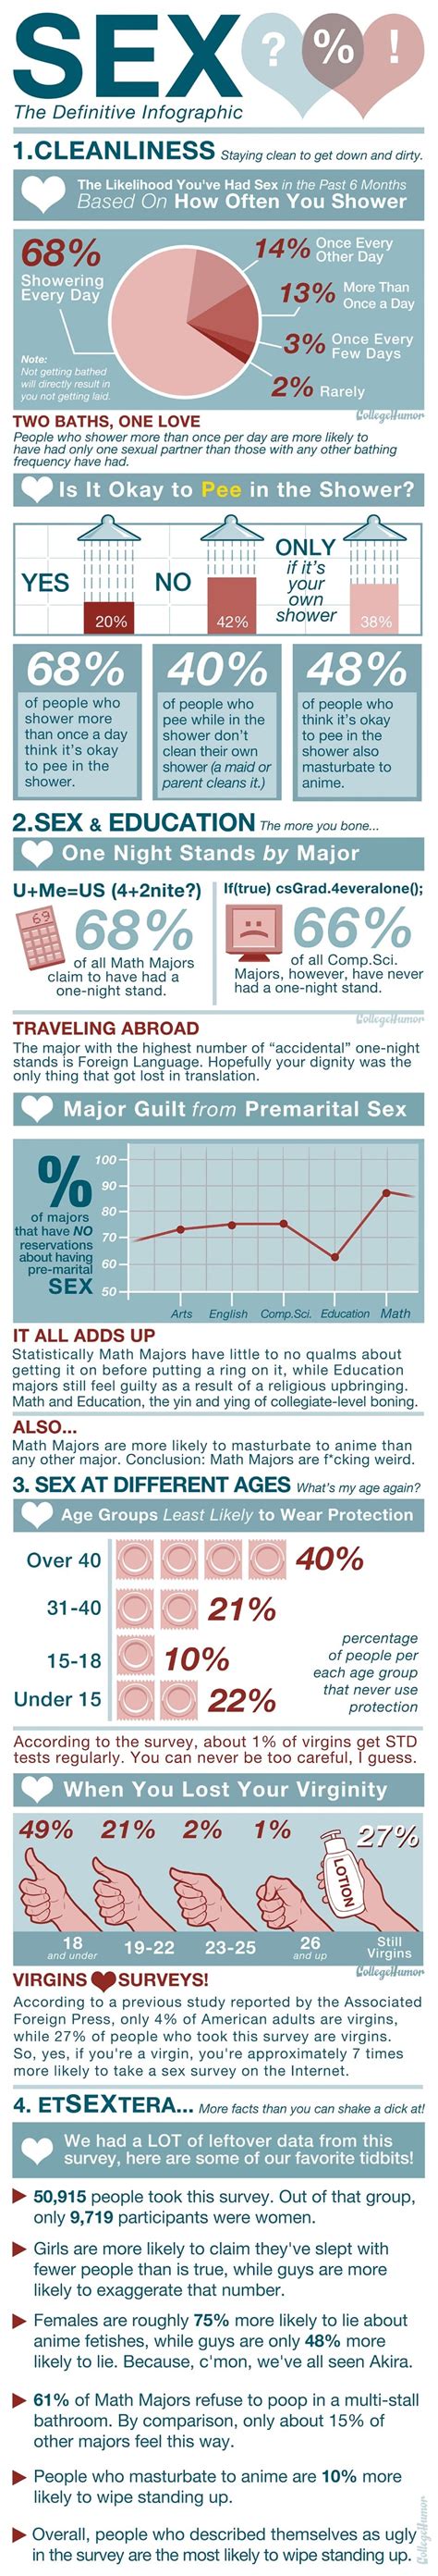 Infographic On Sex The Definitive Infographic By Collegehumor